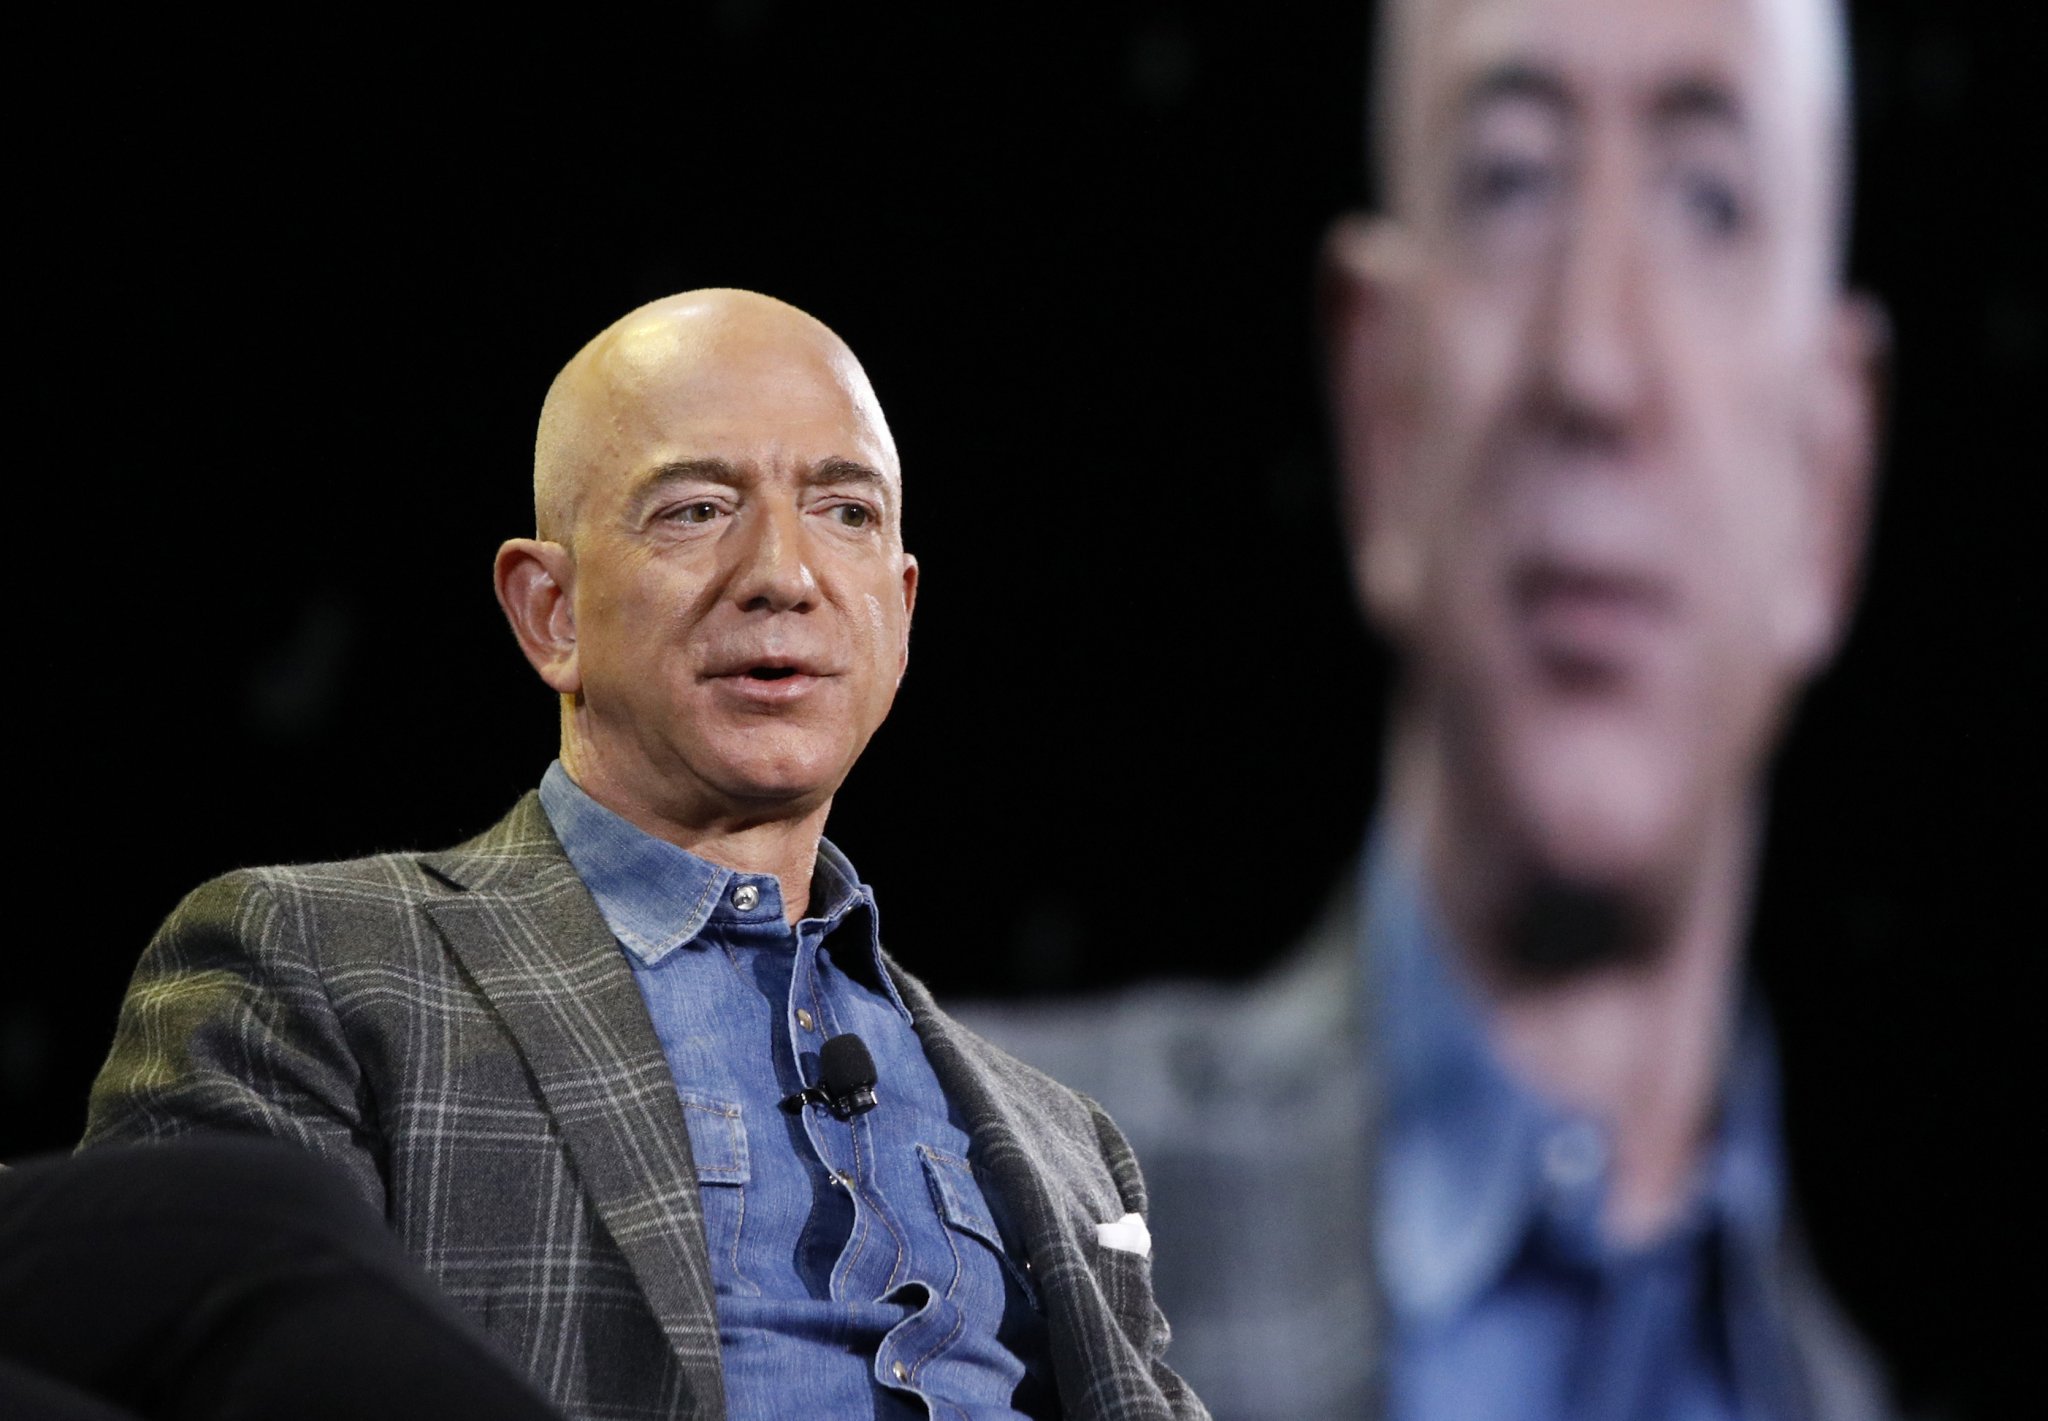 Jeff Bezos Built Amazon 27 Years Ago. He Now Steps Down As CEO At Critical Time